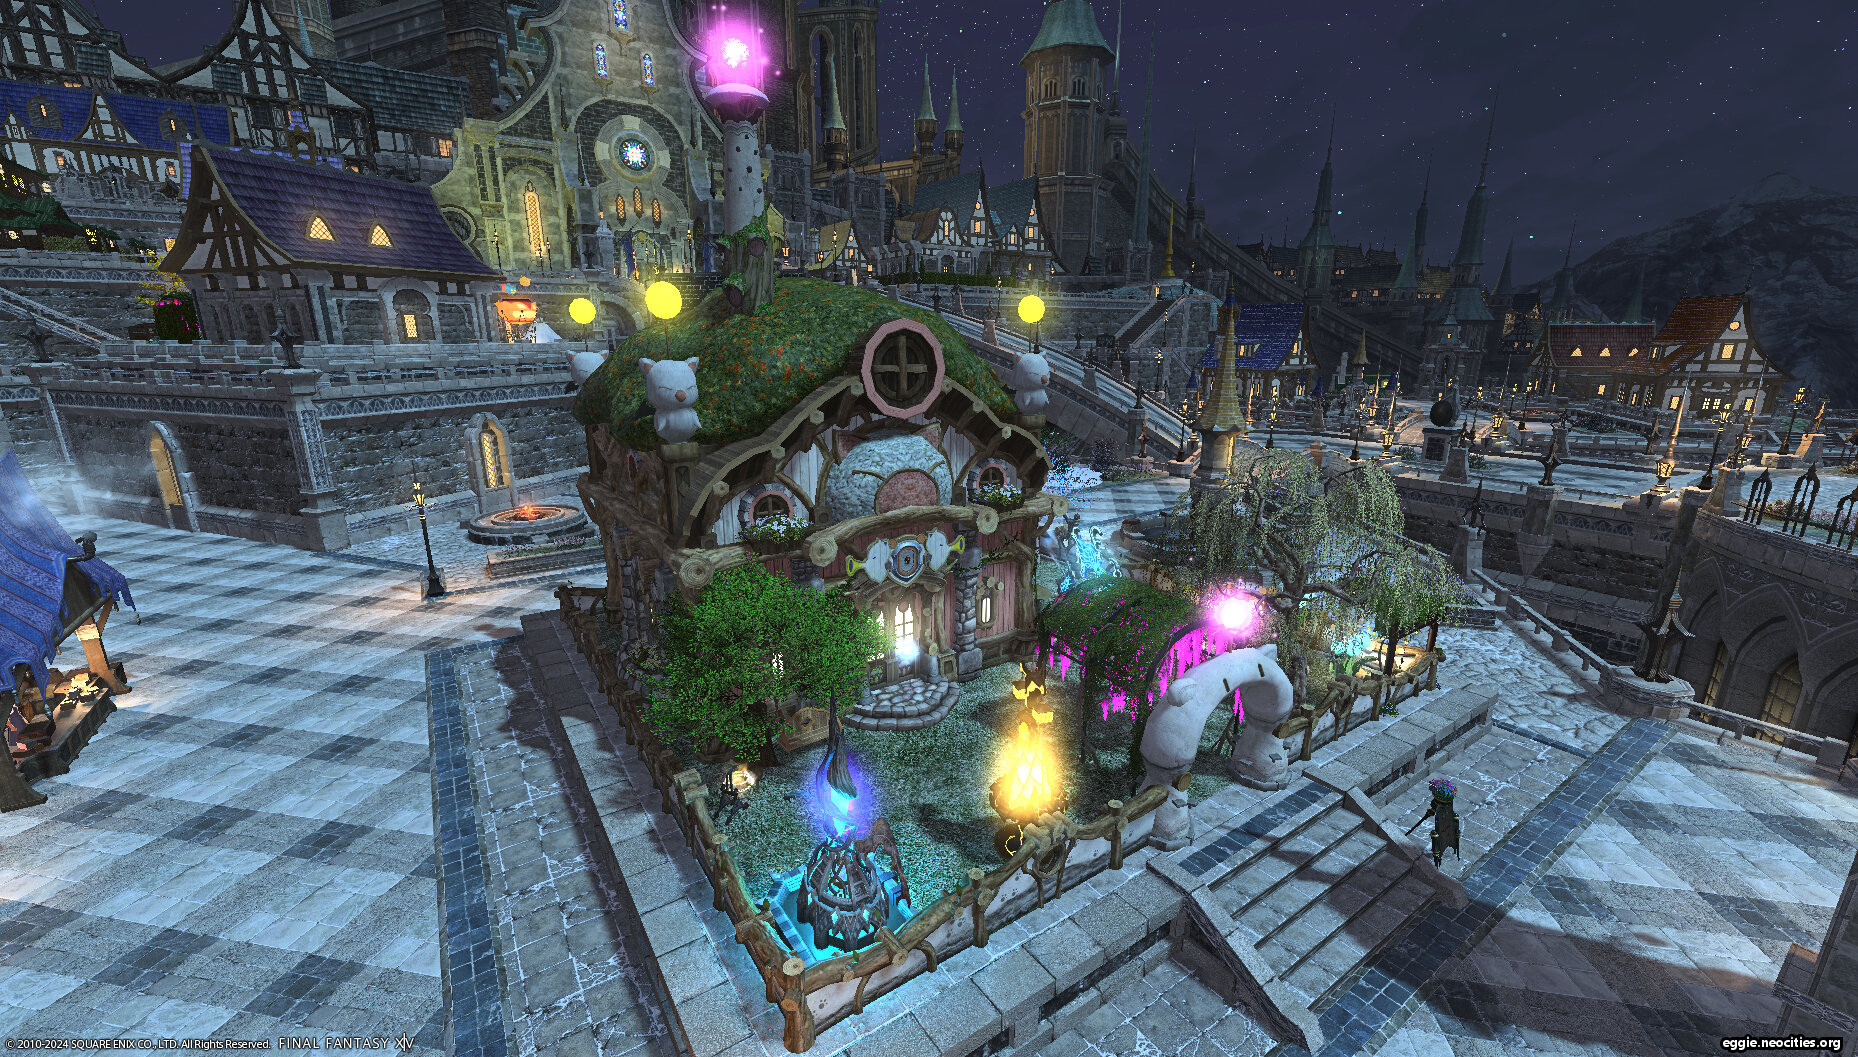 Zel's house, now in the Emperyum ward. The screencap is shot from above at an angle, showing off the Moogle exterior and a few of the outdoor furnishings.